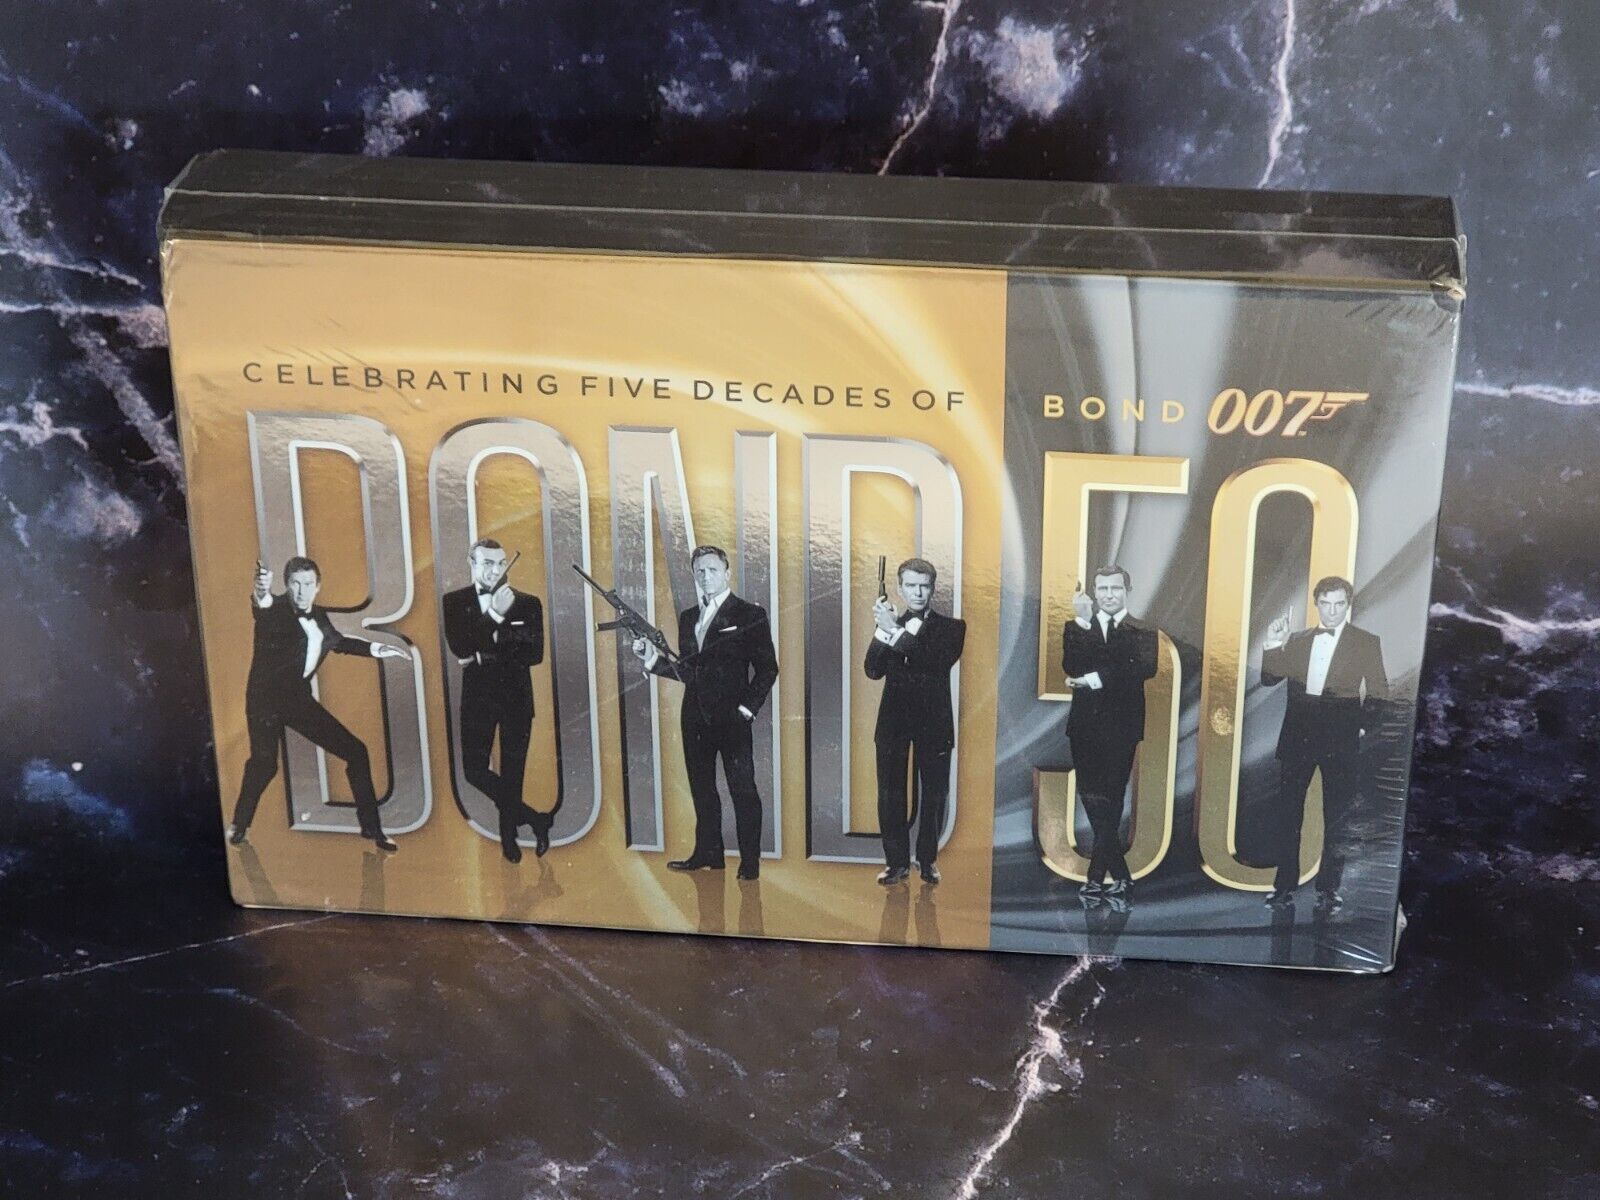 007 Bond : 50th Anniversary Complete Collection 22-Film DVD Box Set New & Sealed